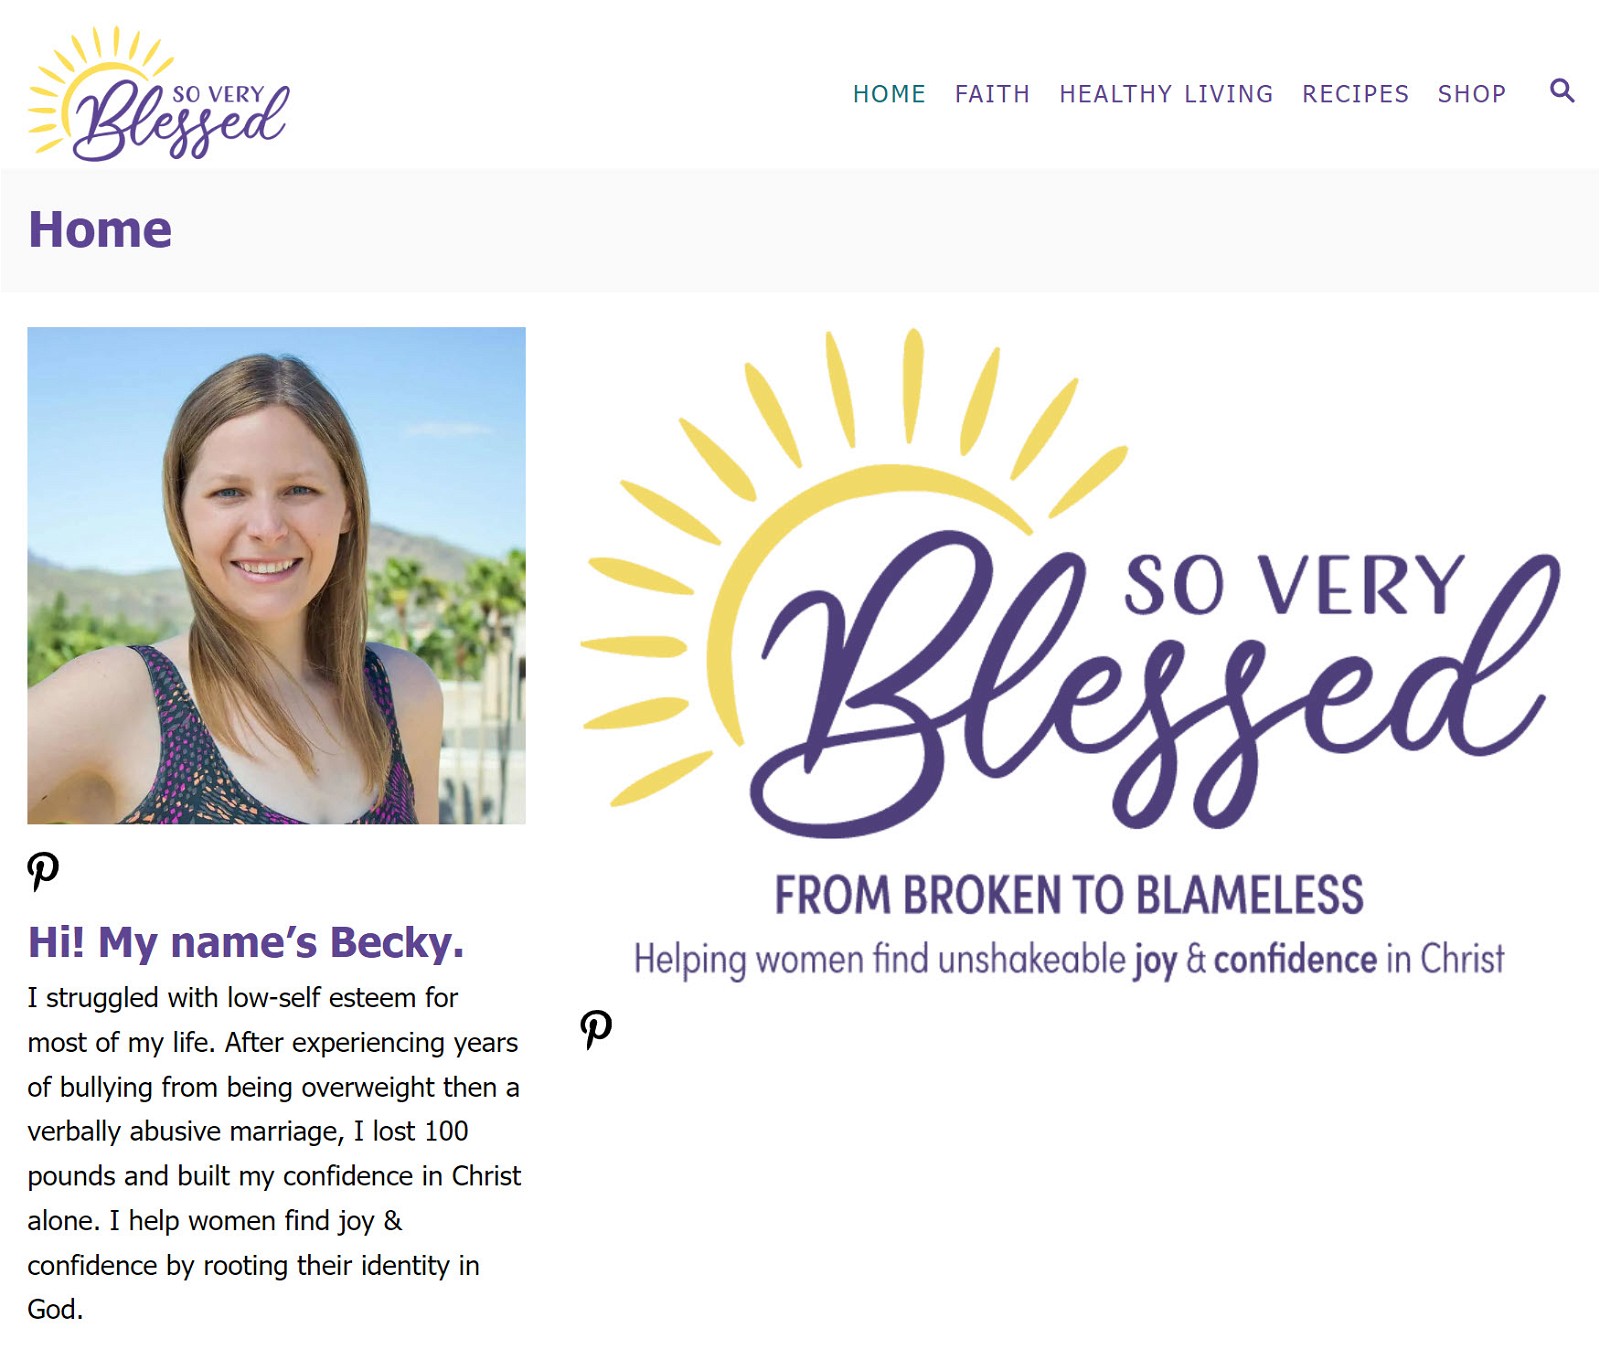 So Very Blessed homepage